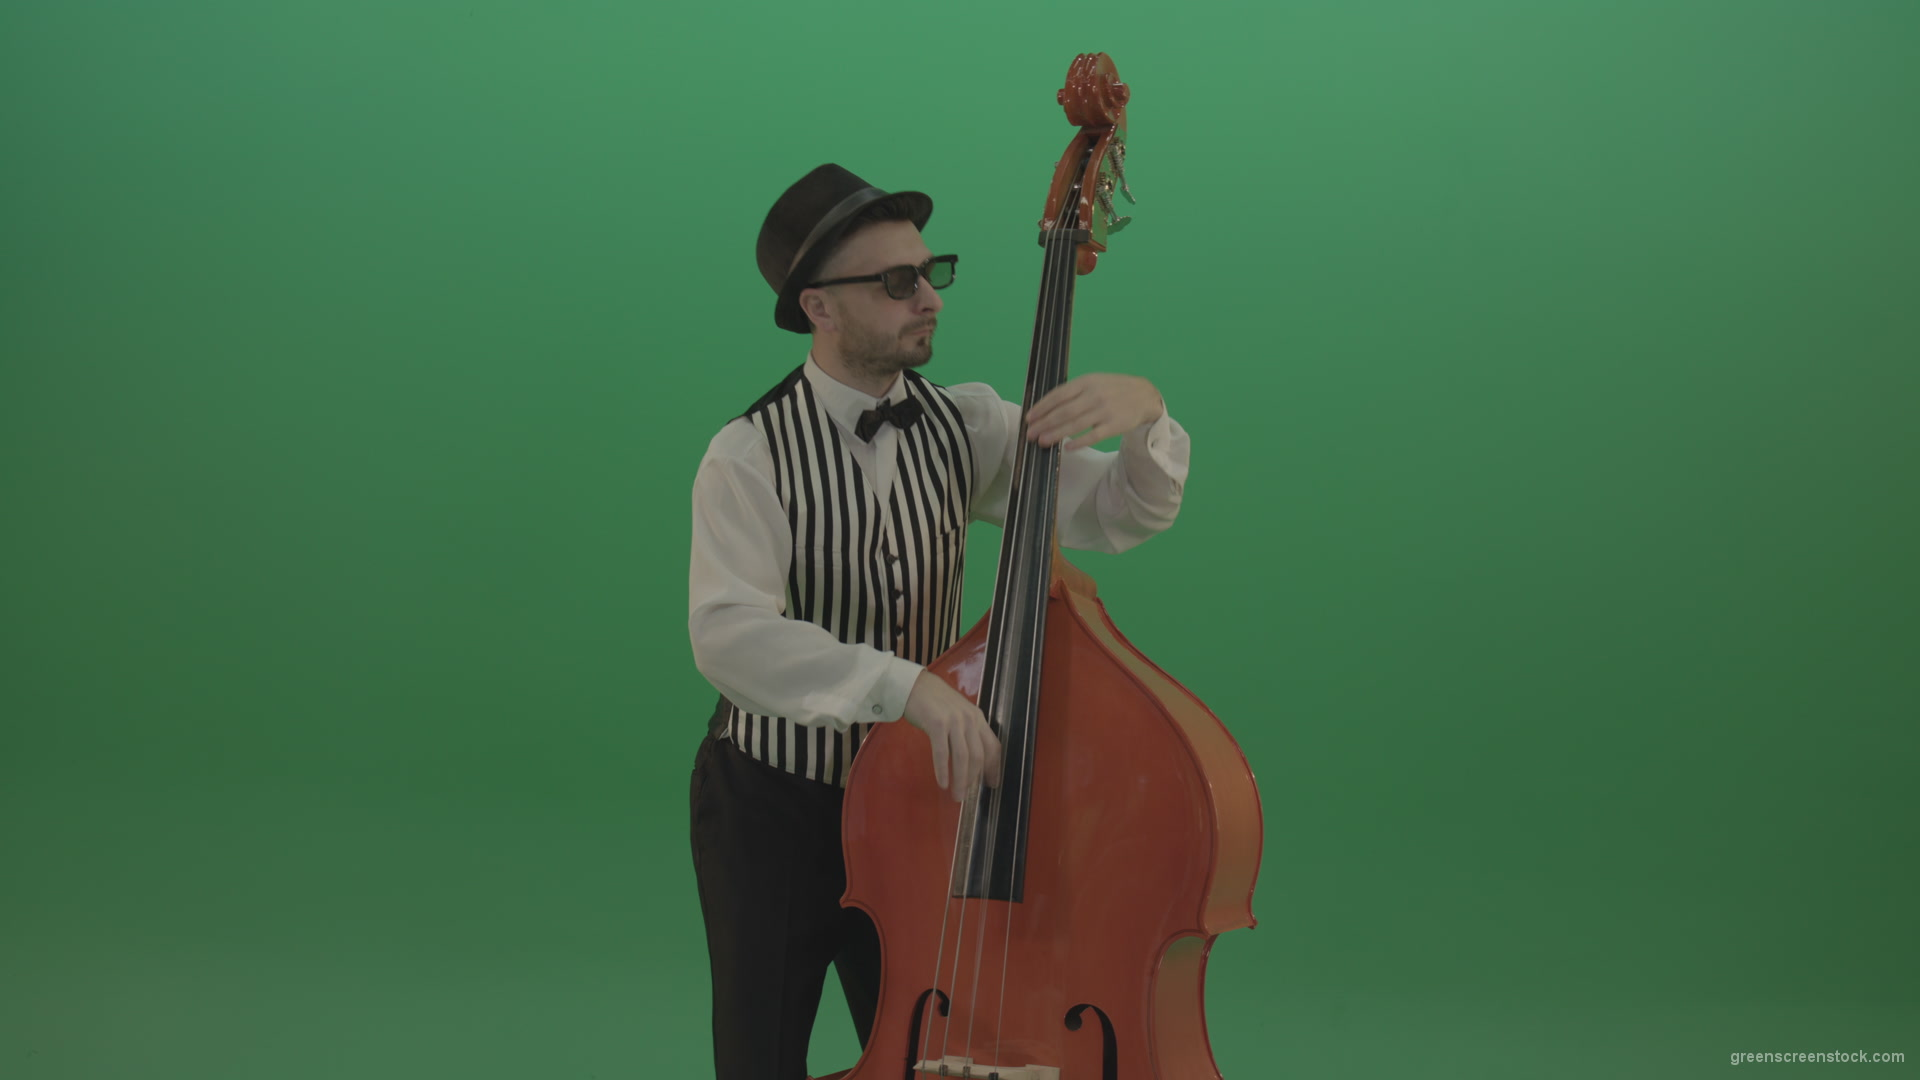 Virtuoso-man-playing-jazz-on-double-bass-String-music-instrument-isolated-on-green-screen_009 Green Screen Stock